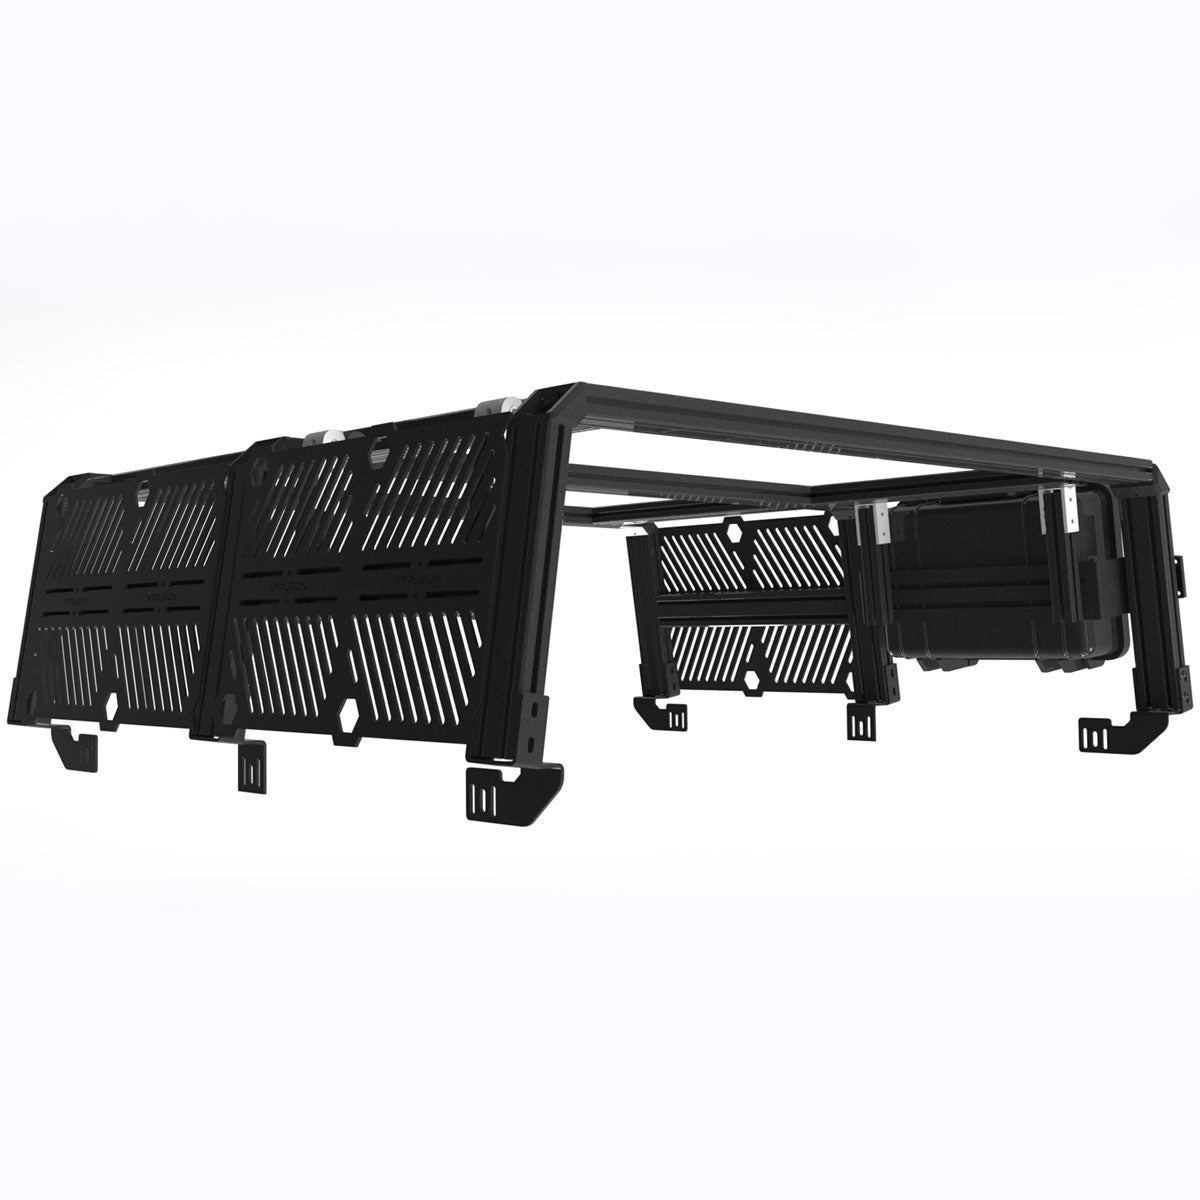 XTR3 Bed Rack only Image with Molle Plates and one recessed case.